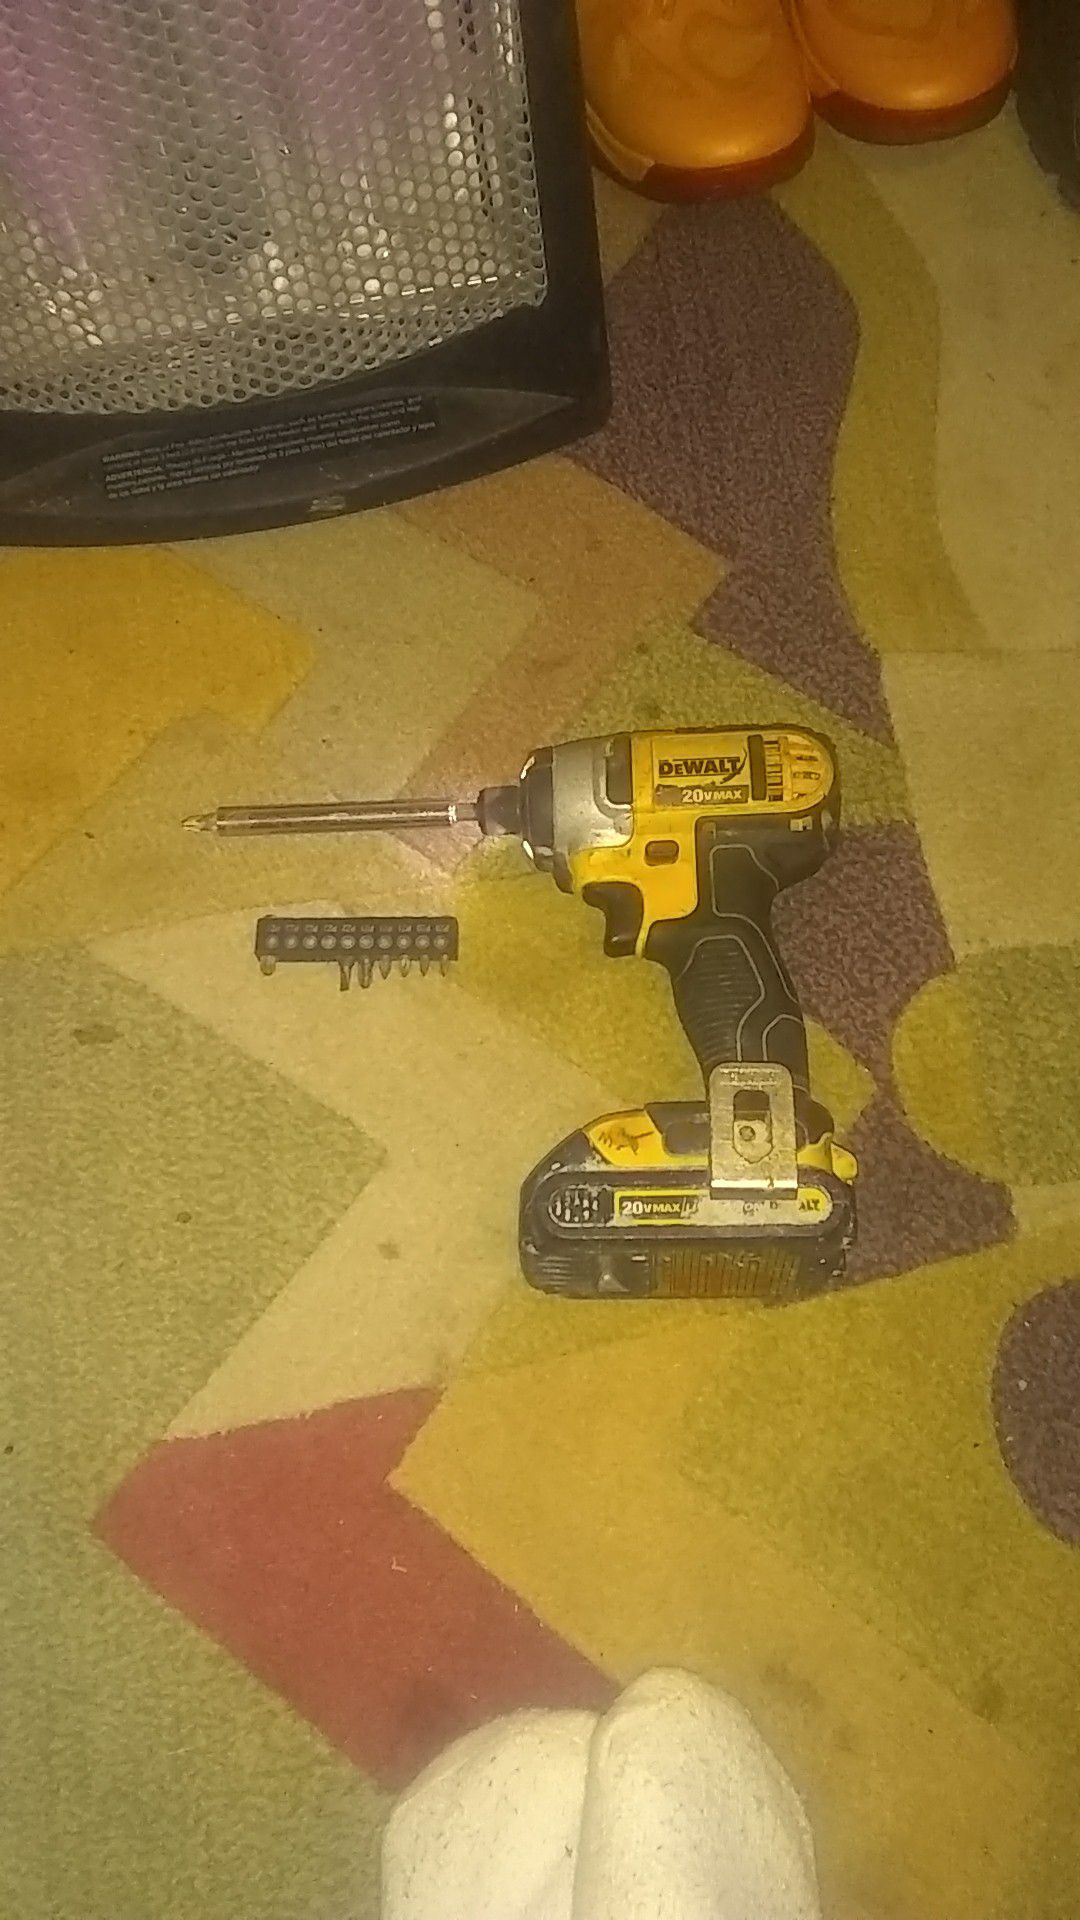 Dewalts drill and heads, no charger